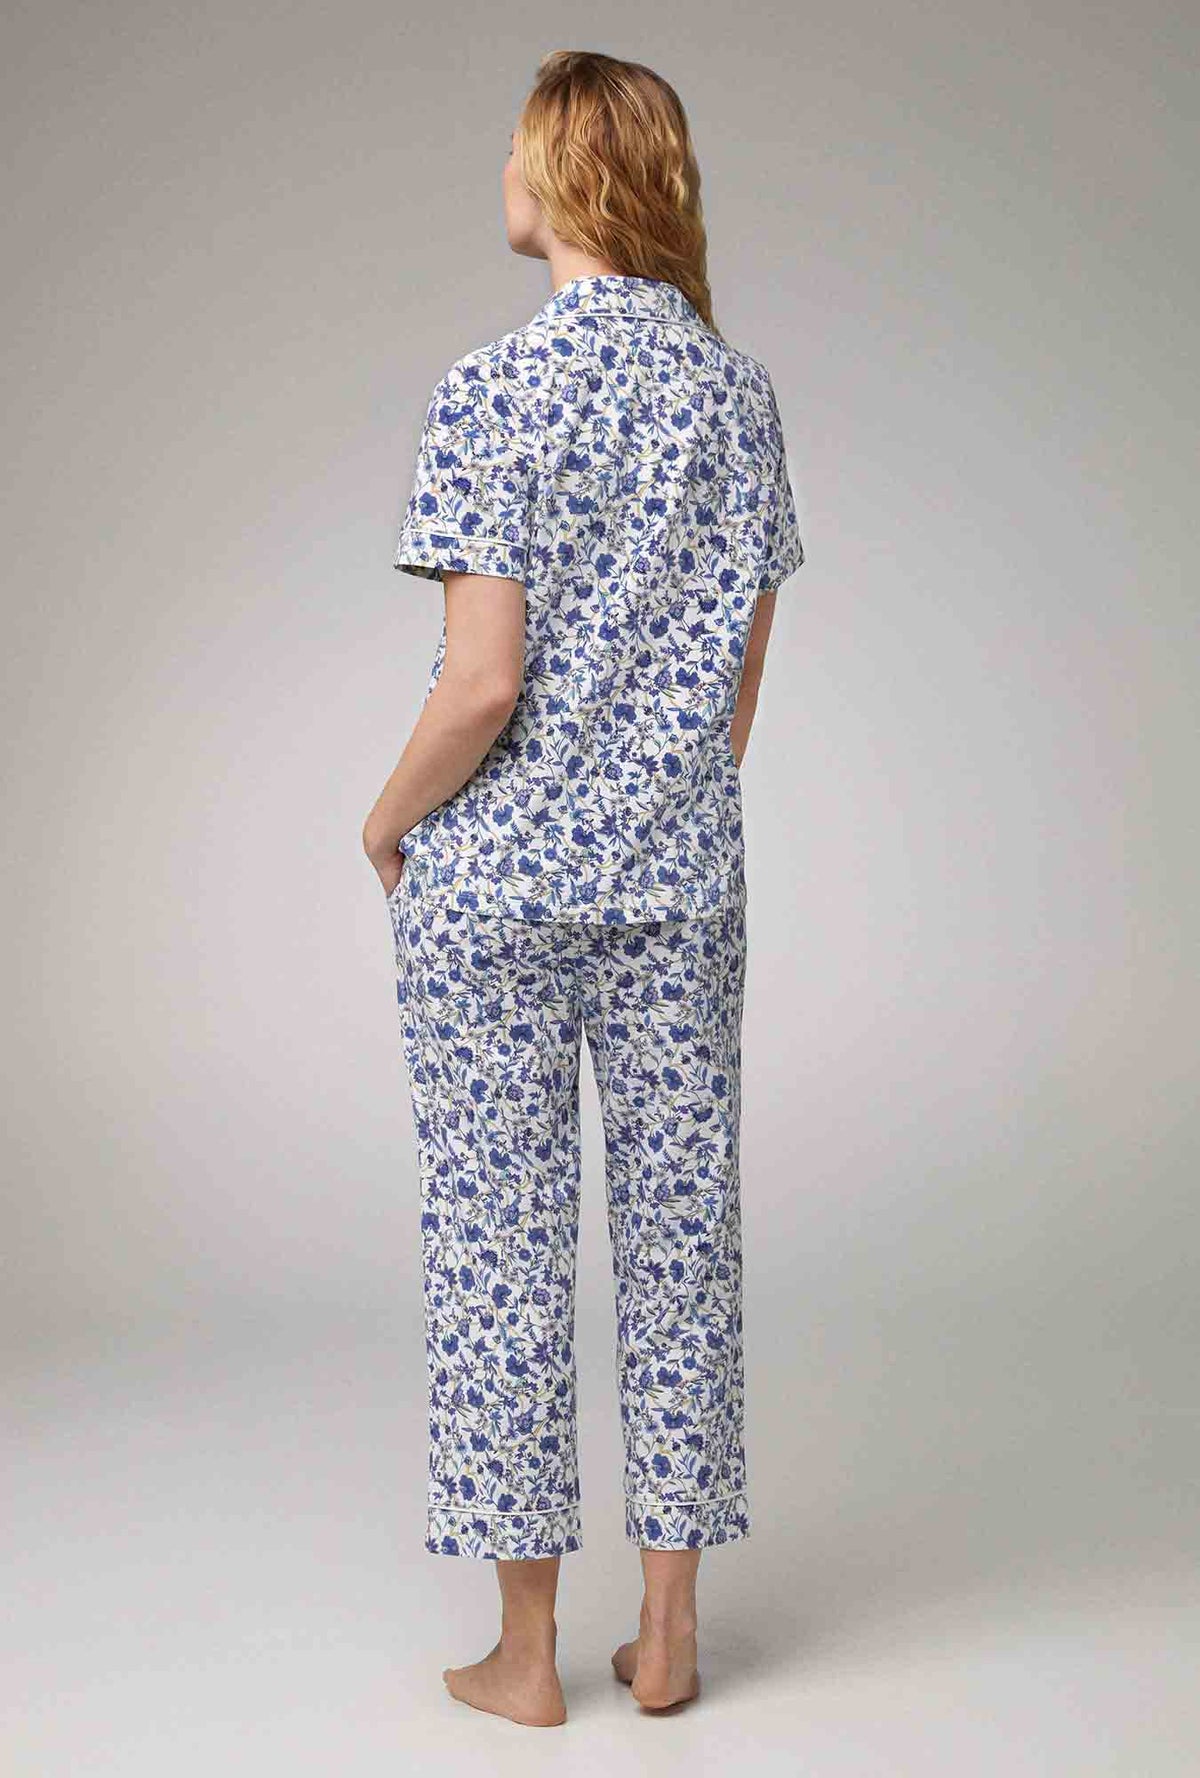 A lady wearing Short Sleeve Classic Stretch Jersey Cropped PJ Set with Terrance Floral print